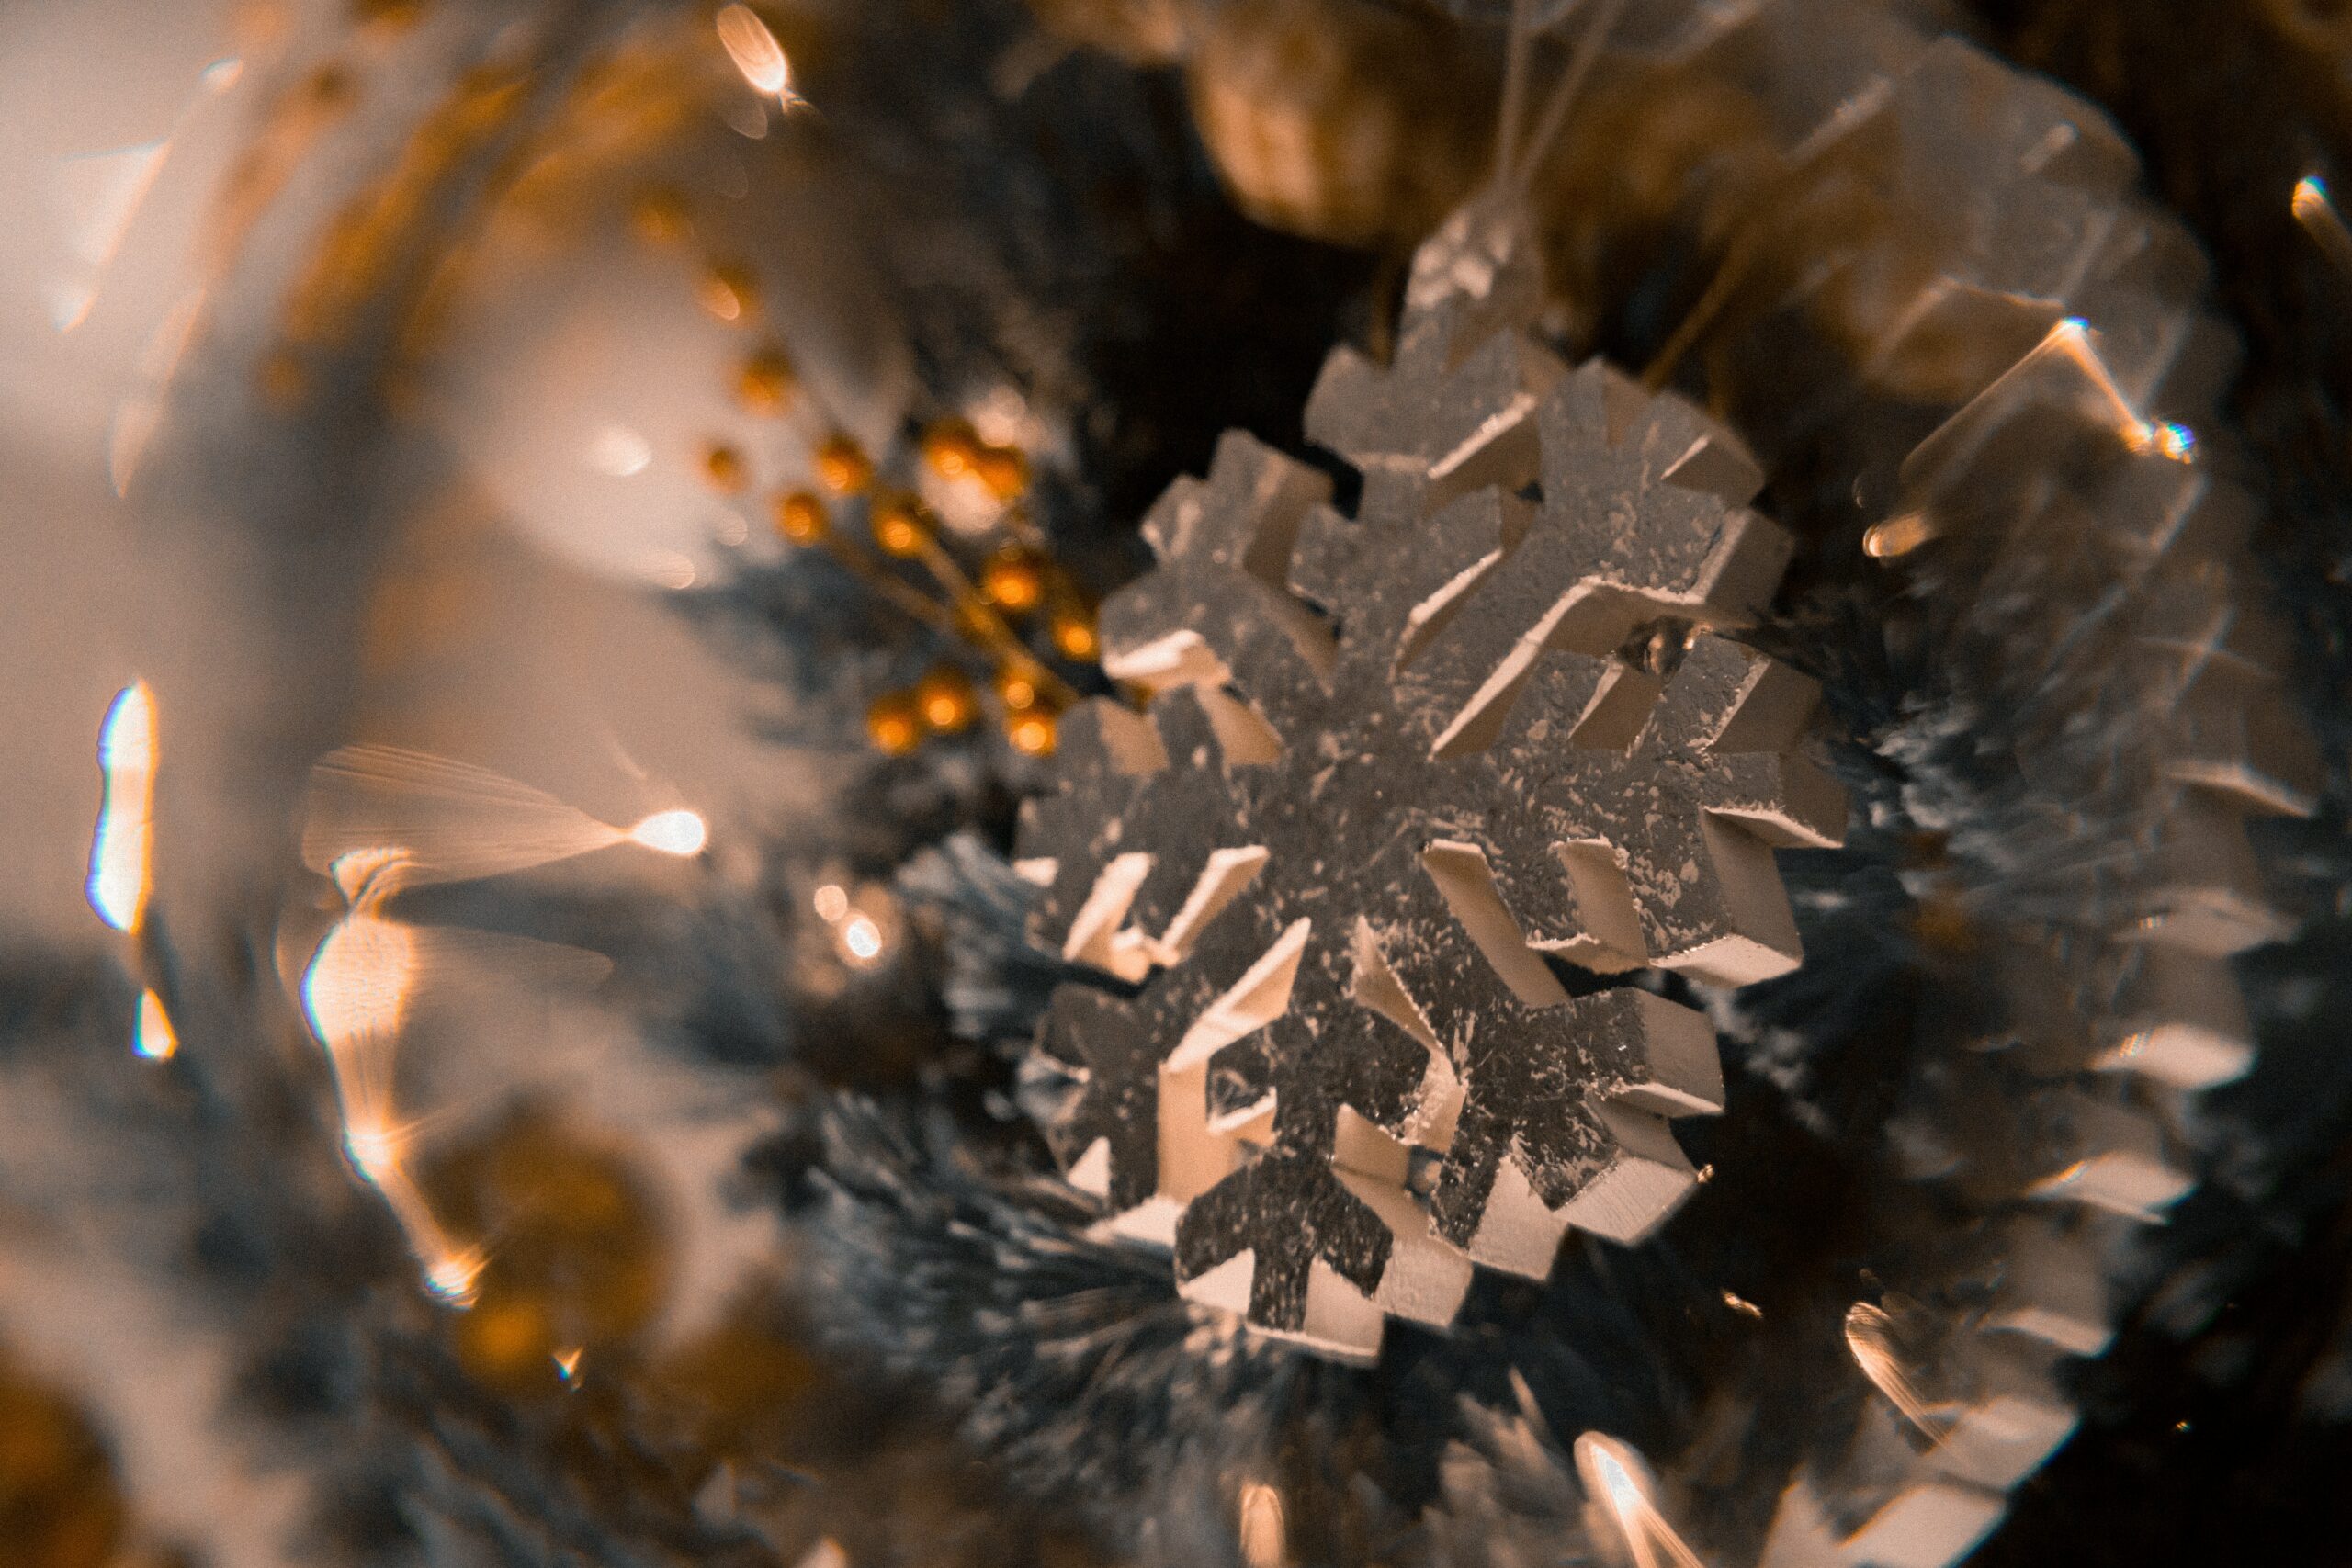 An image of an ornament with a snowflake.